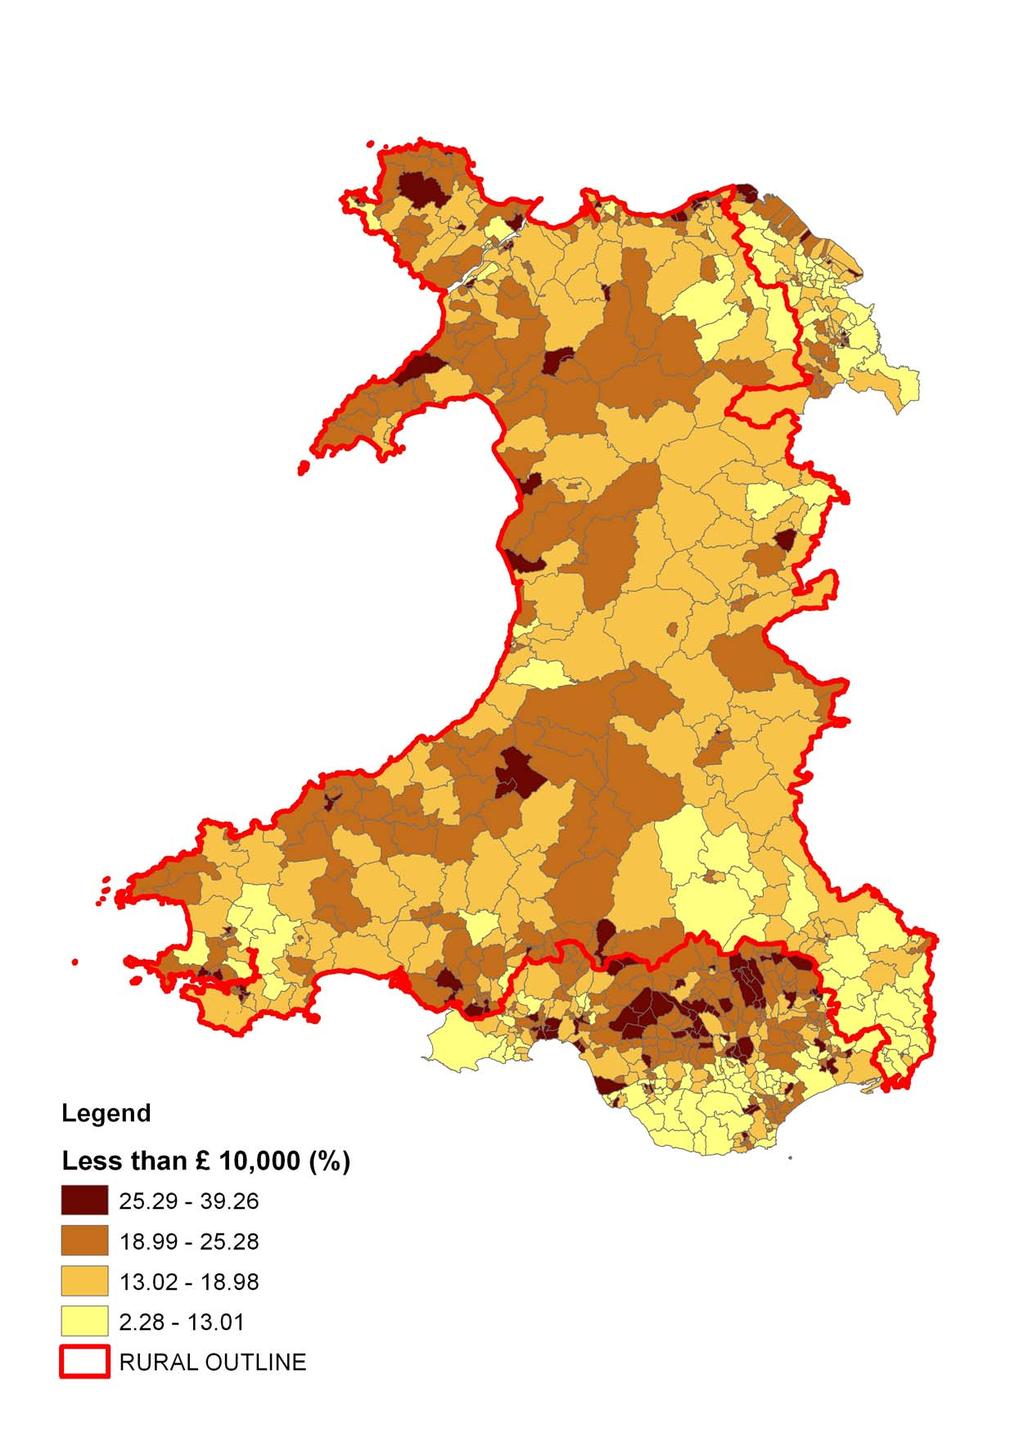 r u r a l 4 5 2 scale and geography of relative poverty in rural Wales t h e o f 7 A l l o w a n c e.